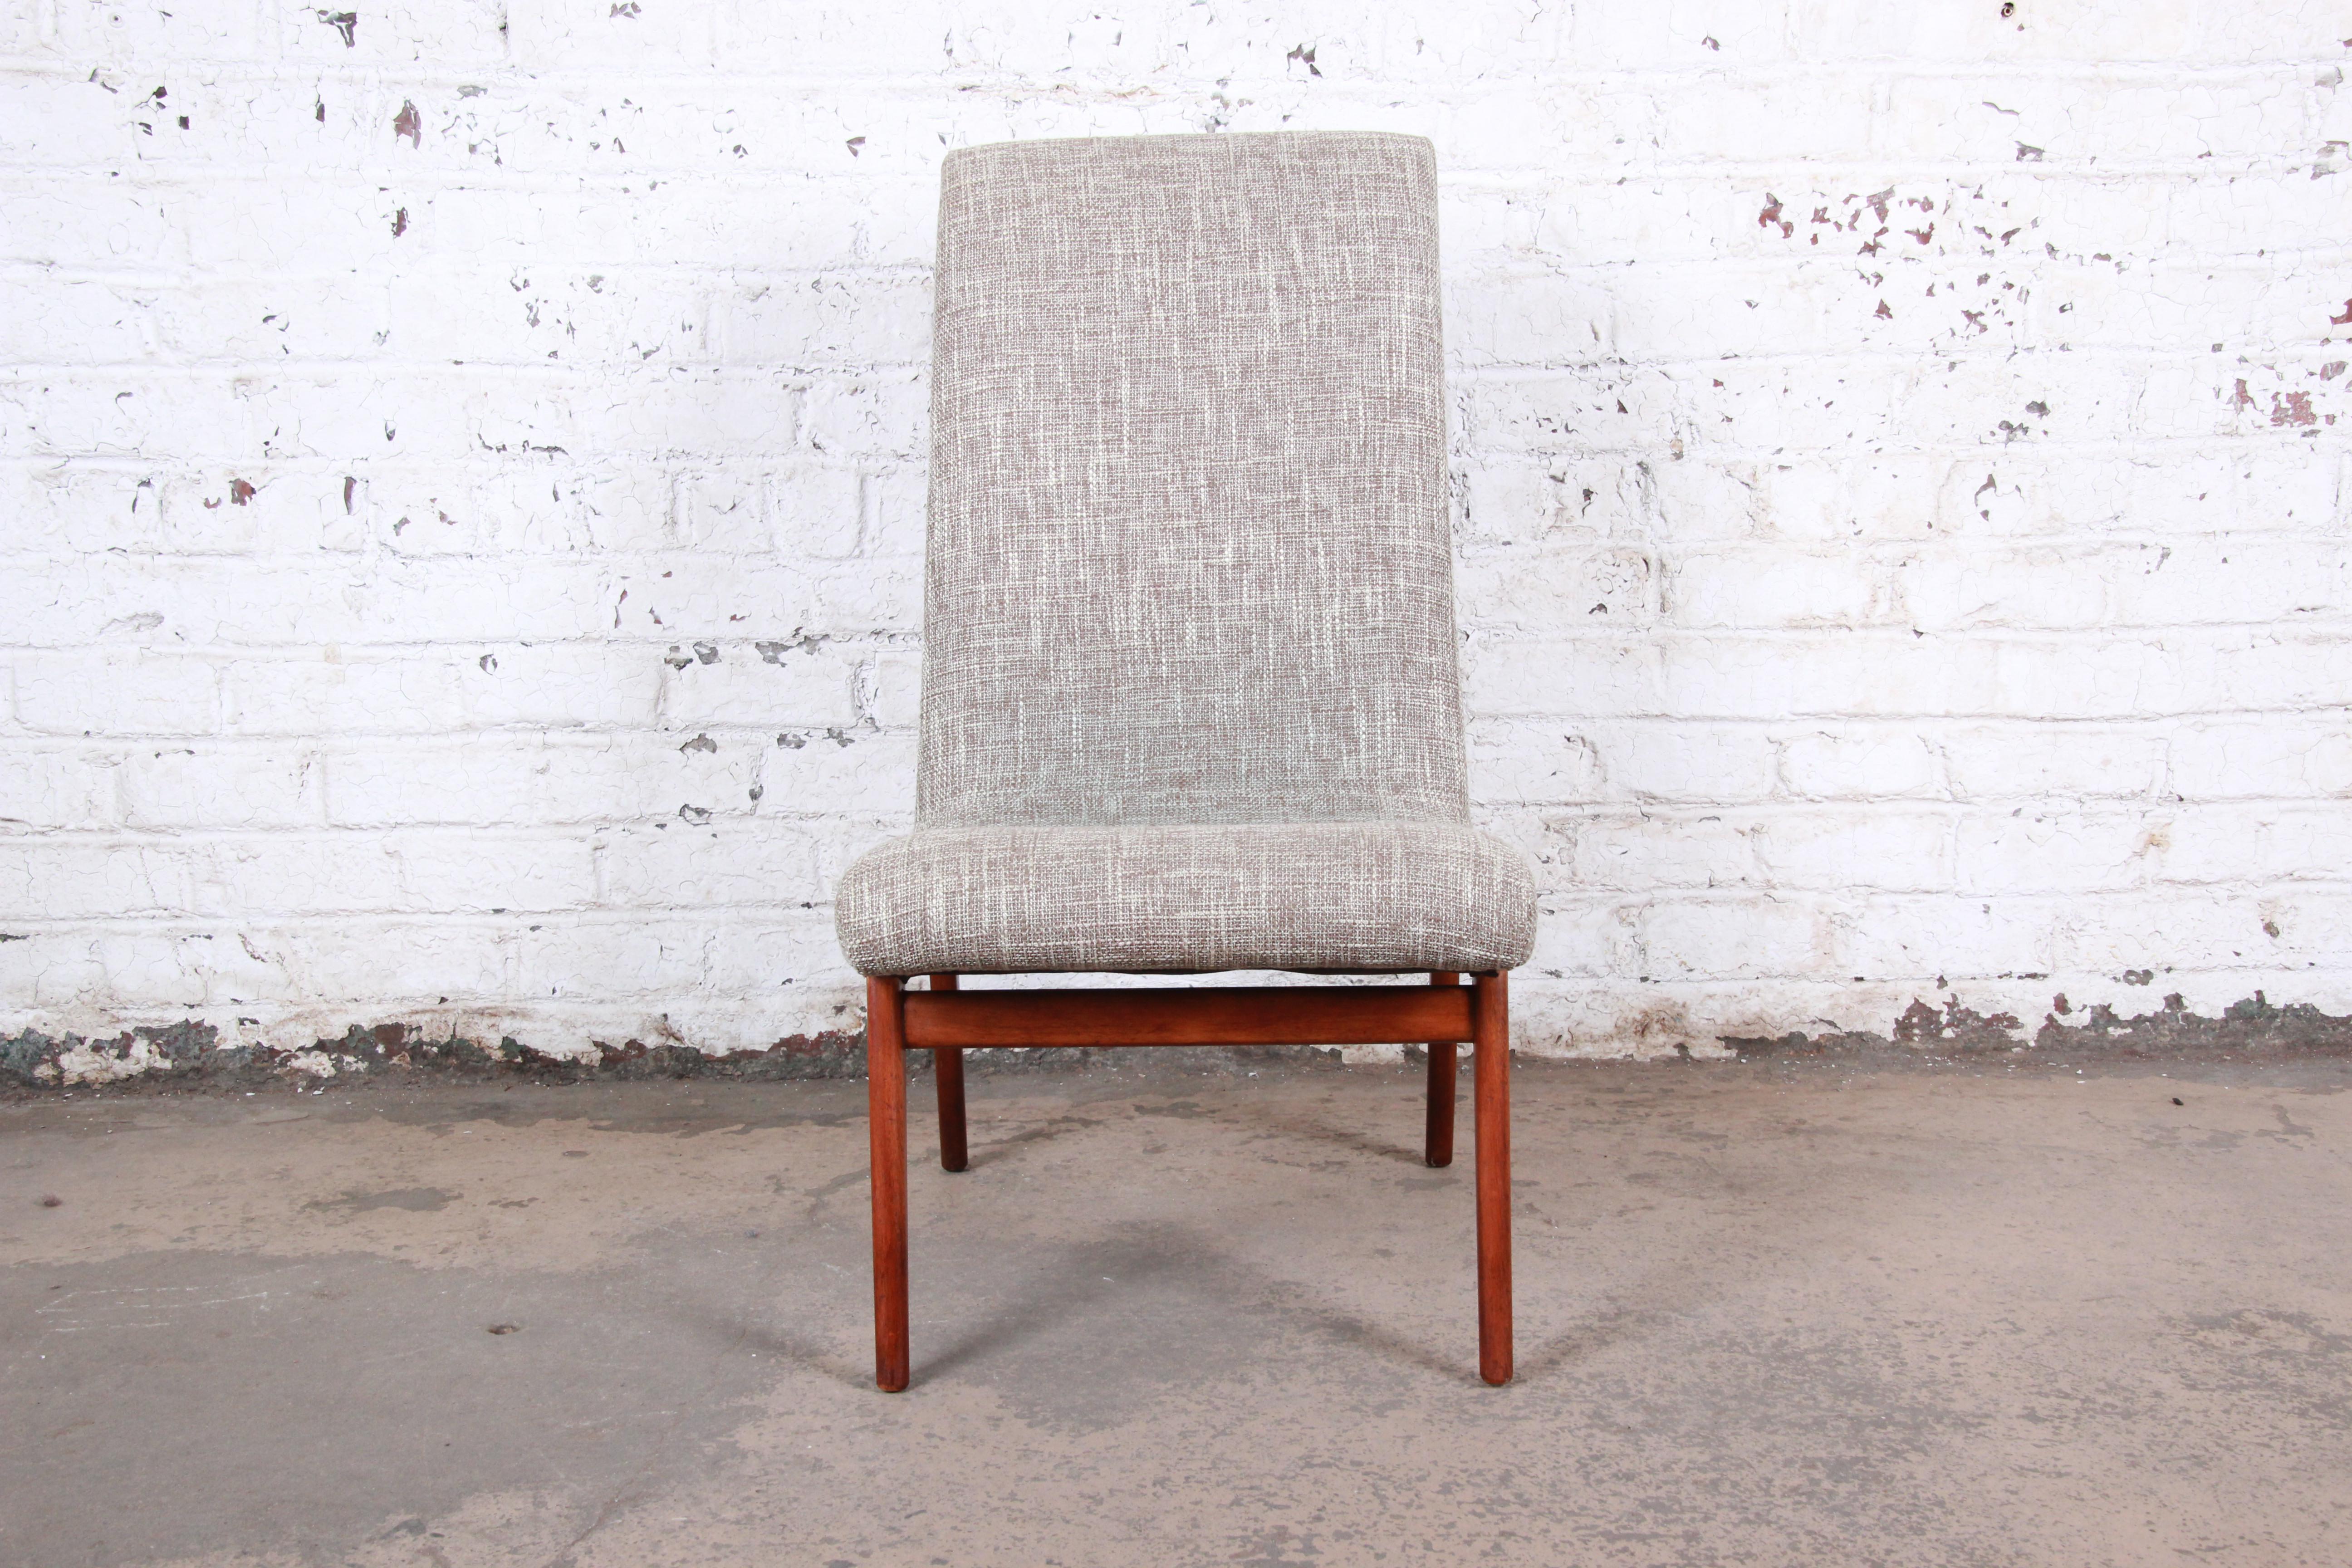 An exceptional Mid-Century Modern slipper chair by famed American Industrial designer Norman Bel Geddes for Valley Furniture, circa 1940s. The chair has been newly reupholstered in gorgeous Knoll fabric in cream and tan. It has beautiful tapered